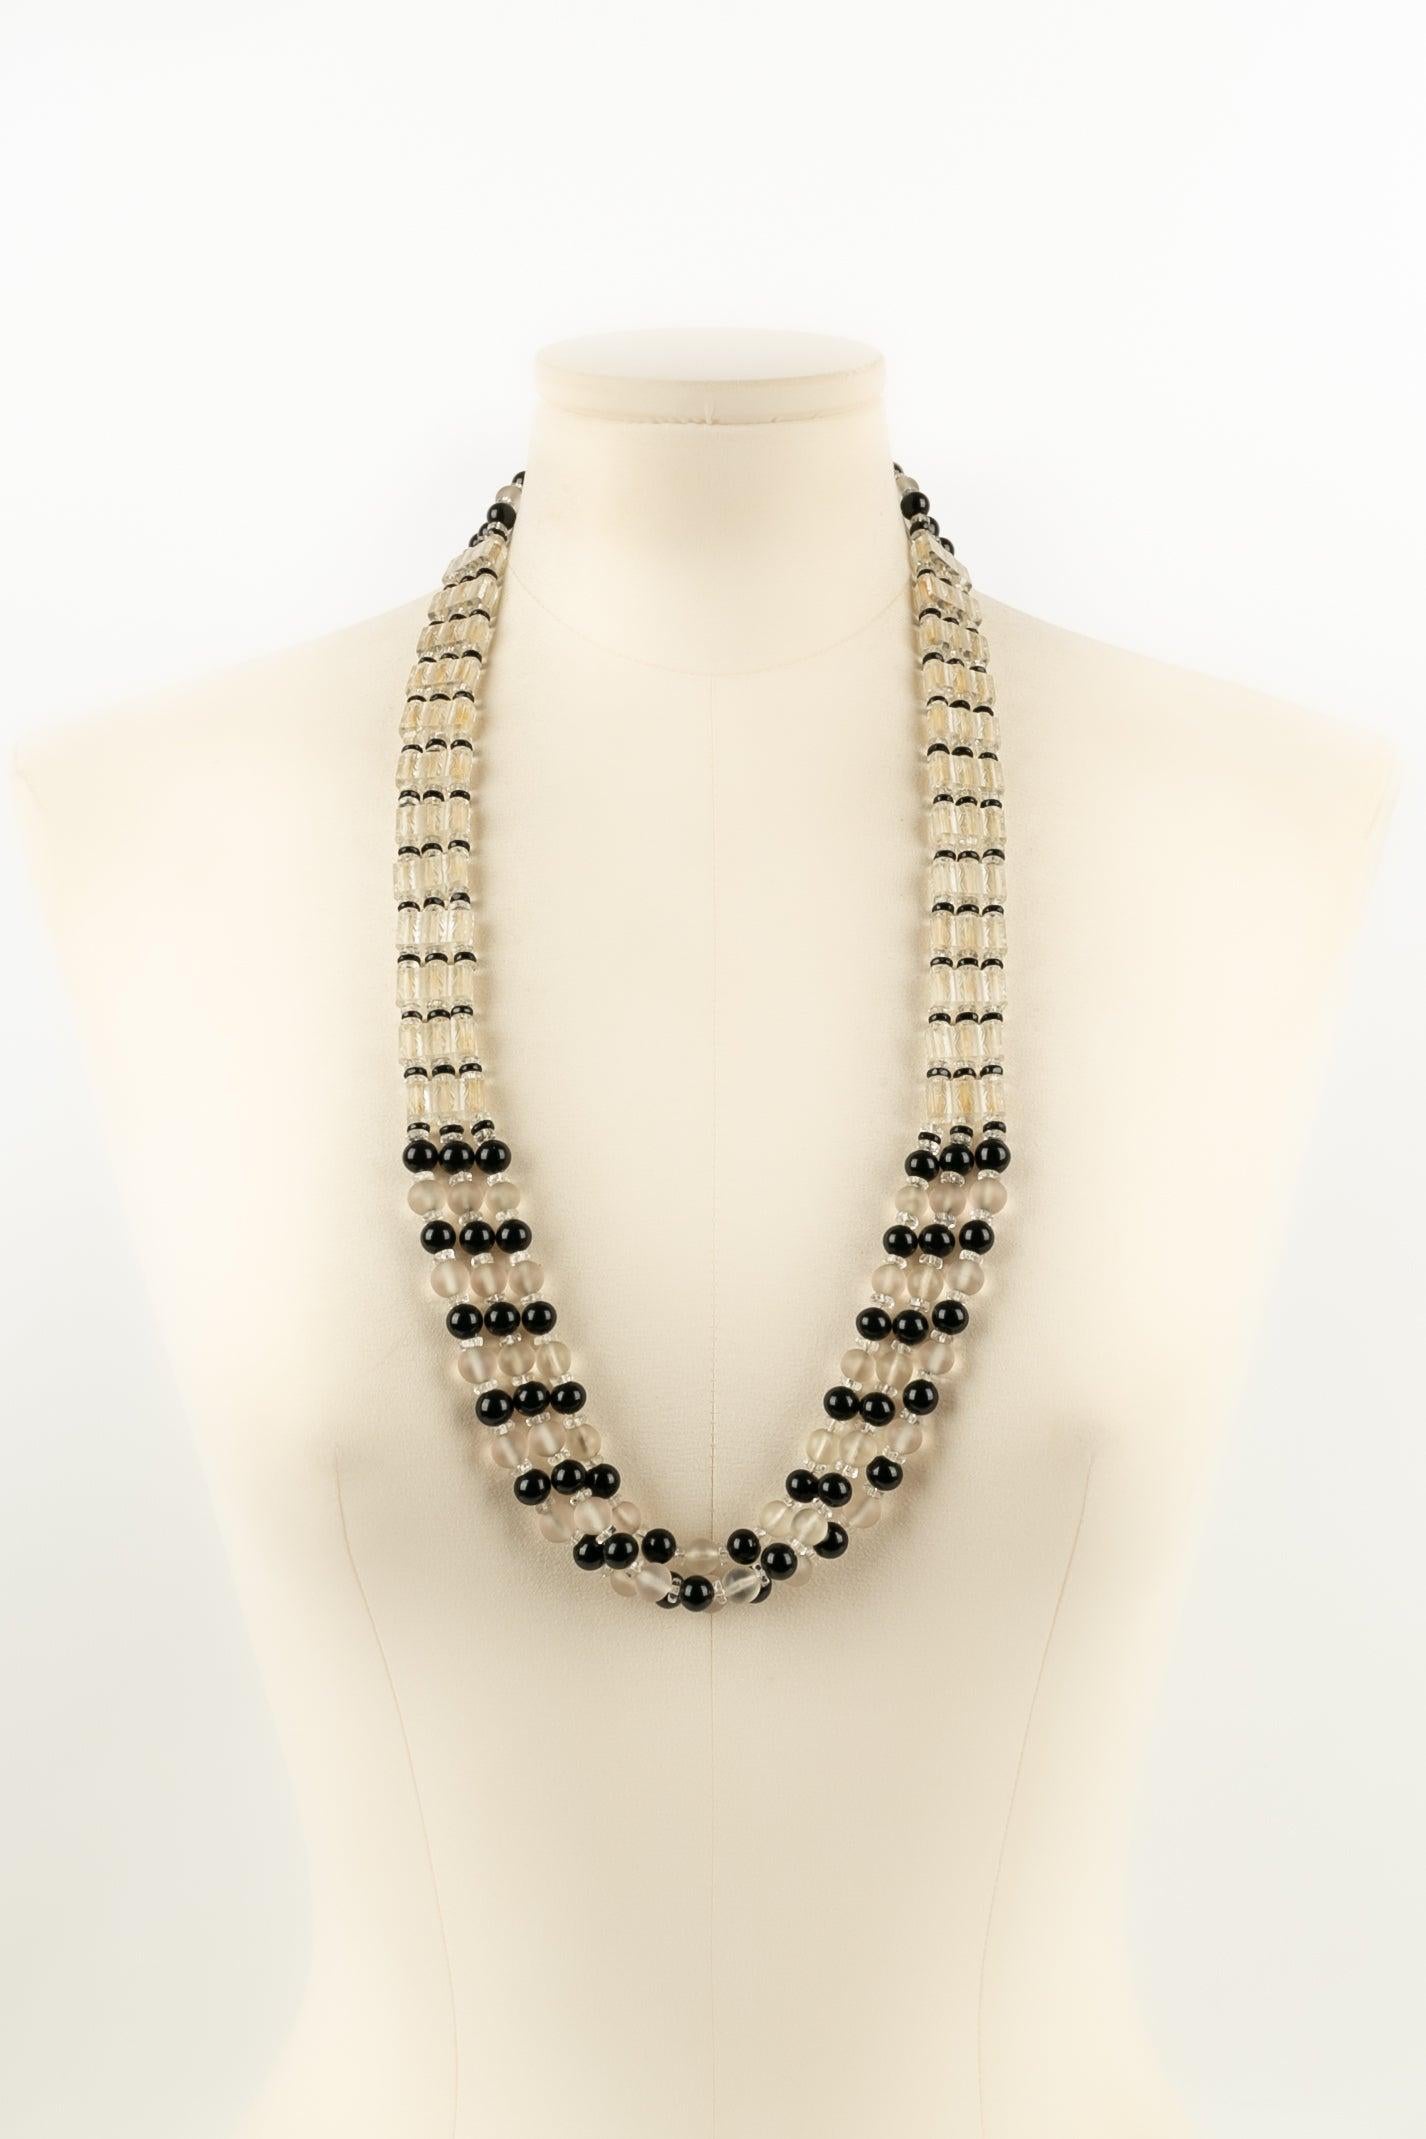 Rousselet - Necklace in transparent and black glass pearls.

Additional information:
Condition: Very good condition
Dimensions: Length: 74 cm
Period: 20th Century

Seller Reference: BC199